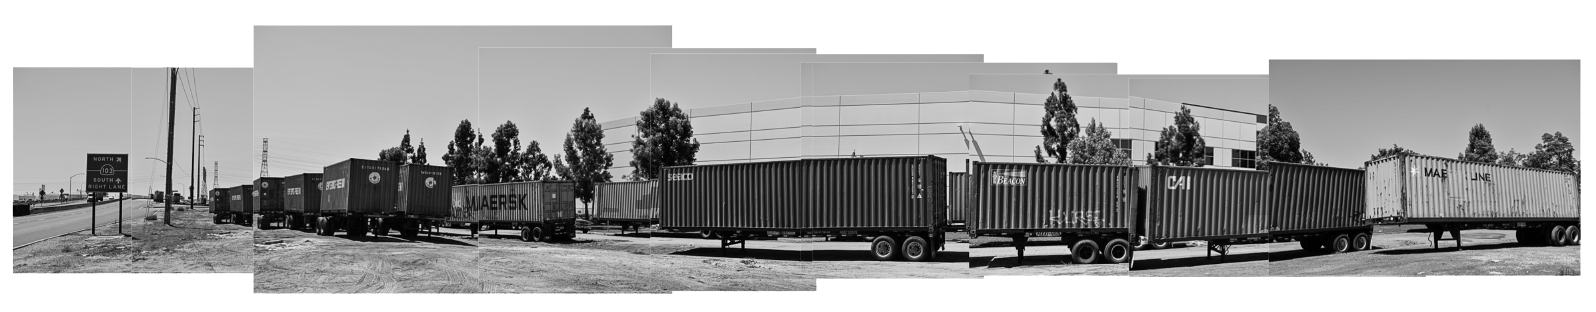 Black and white panoramic image made from multiple photos of semi trailers